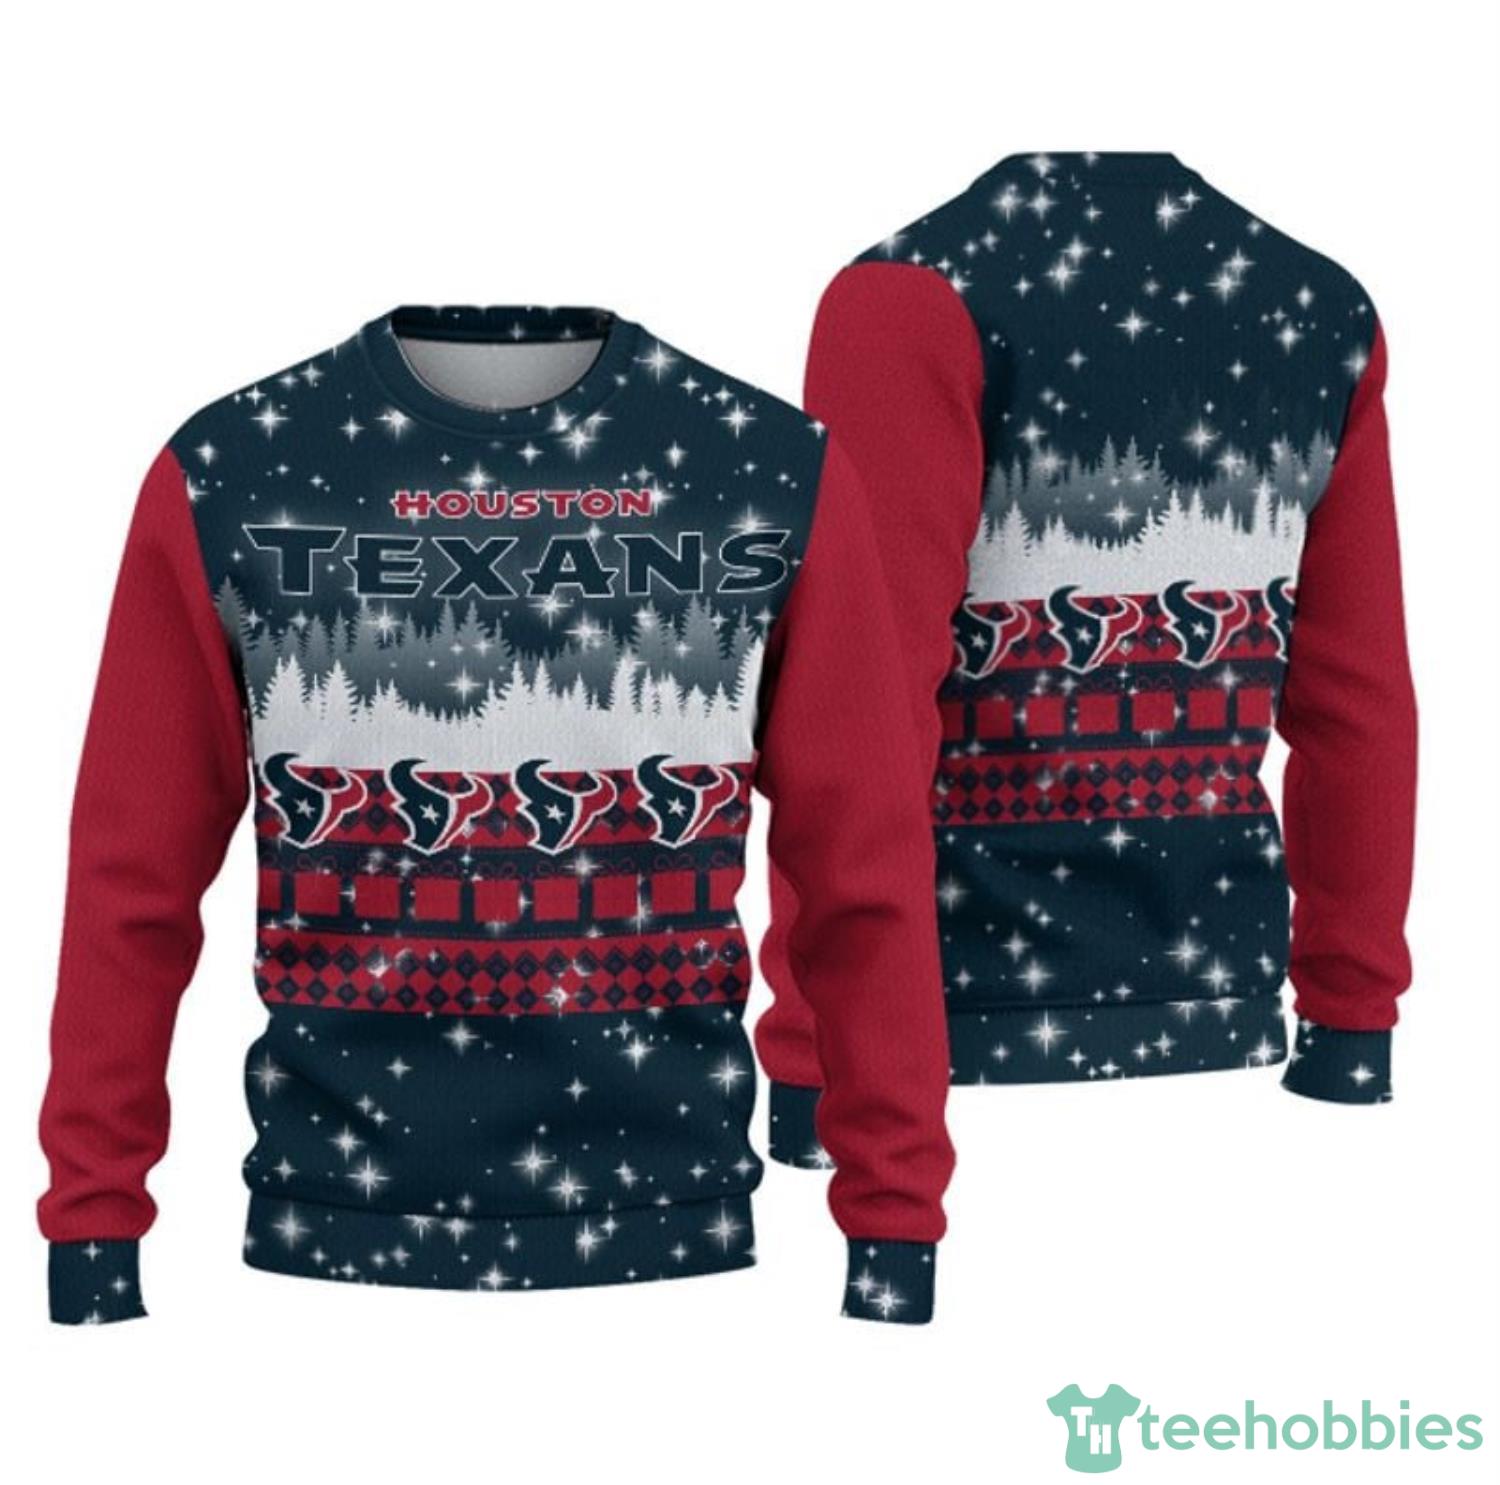 Houston Texans Christmas Forrest Pattern Ugly Christmas Sweater Product Photo 1